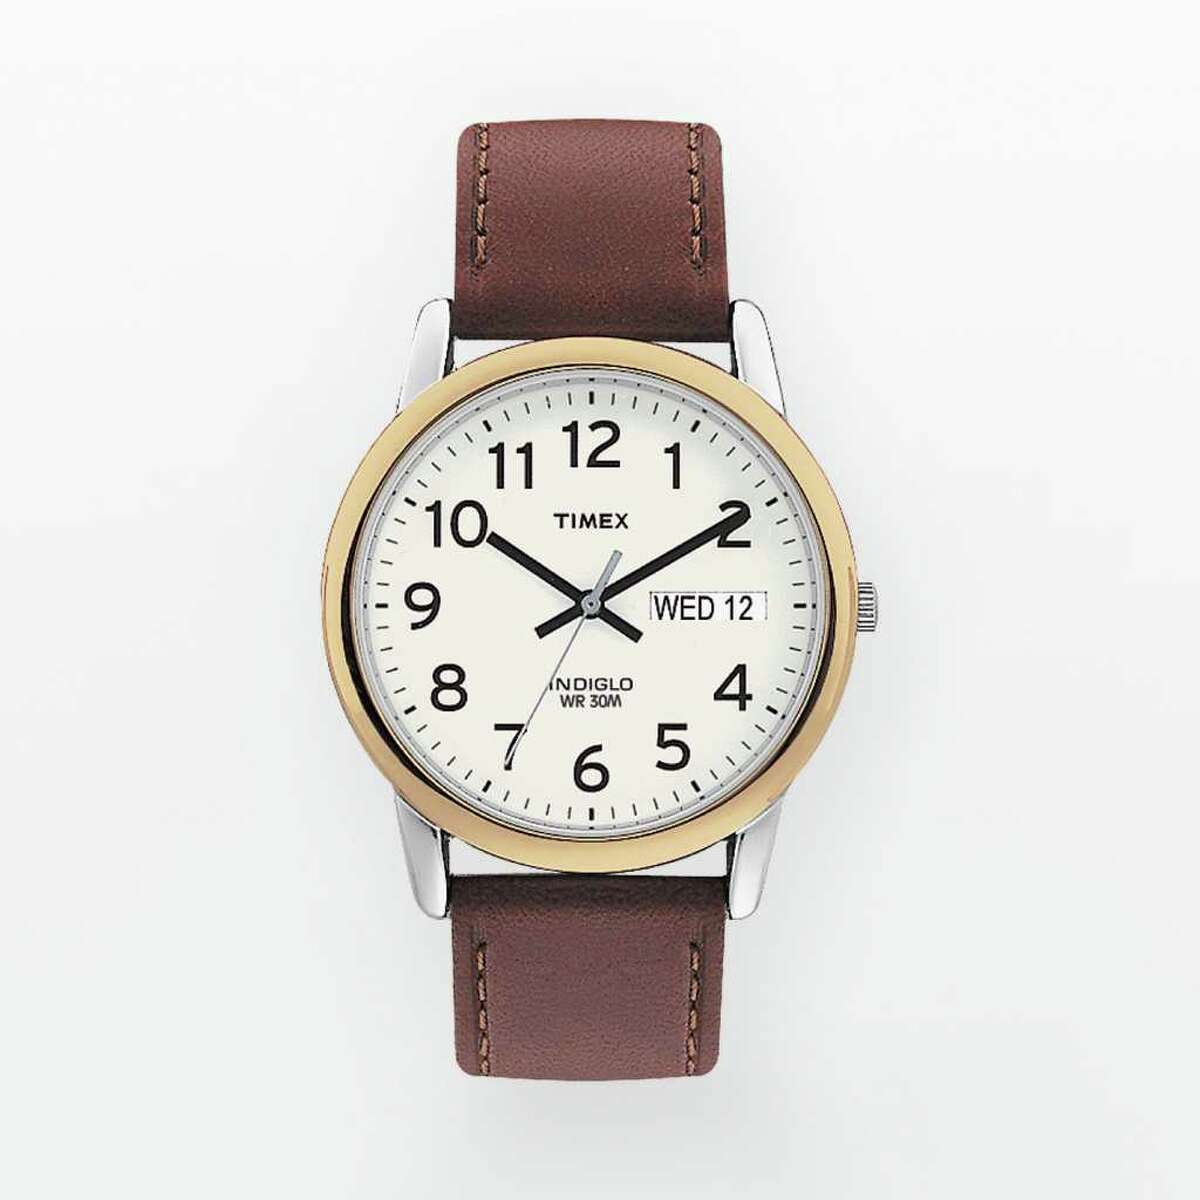 TIMED: Accessorize with simple pieces, like a Timex watch, $49.95 at Kohl?s and Kohls.com.